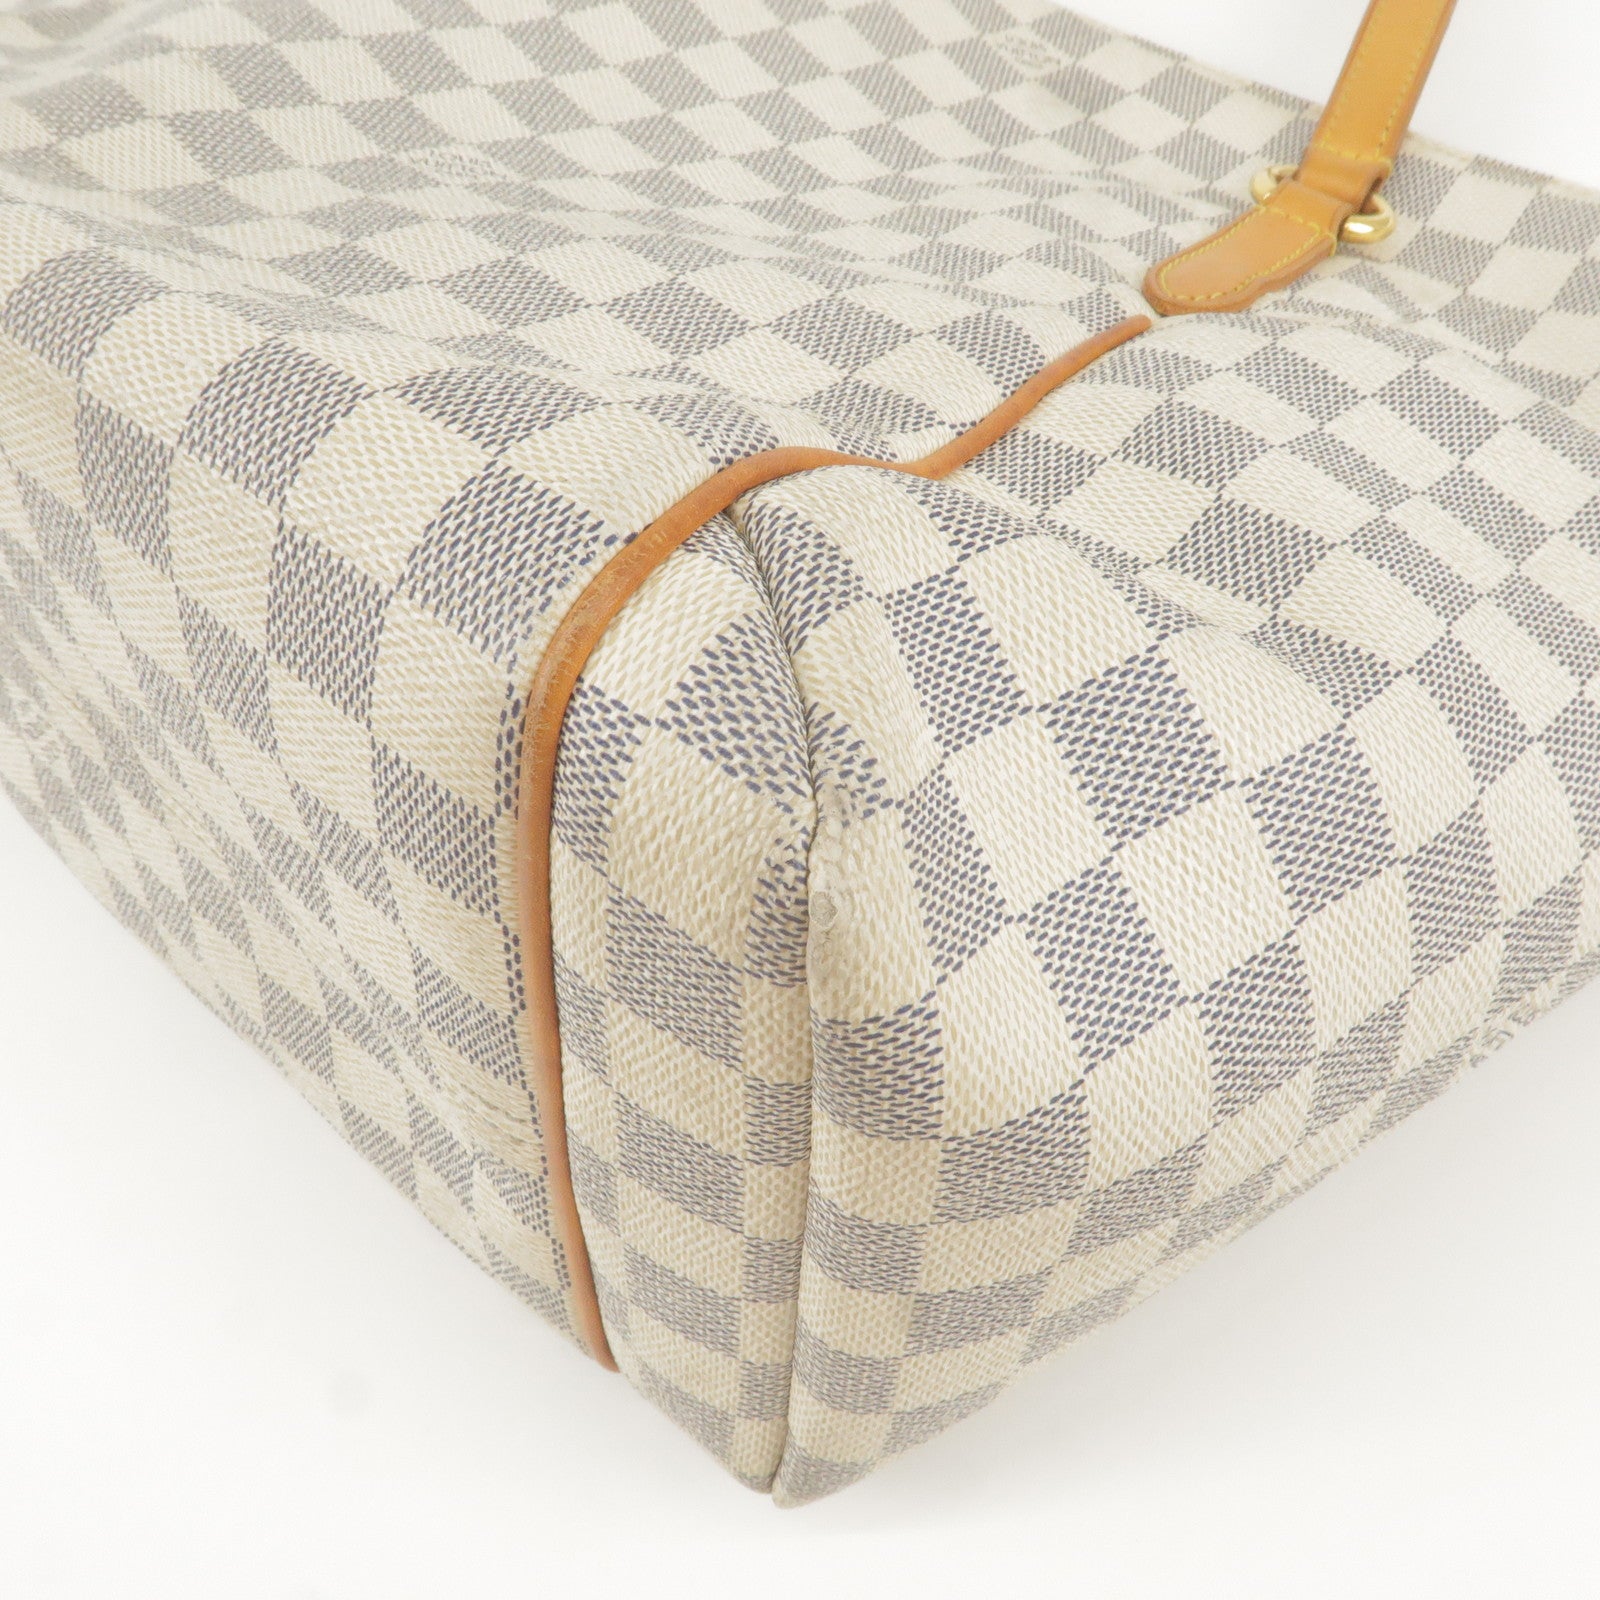 Authentic Louis Vuitton Damier Azur Totally MM Tote Bag N51262 LV